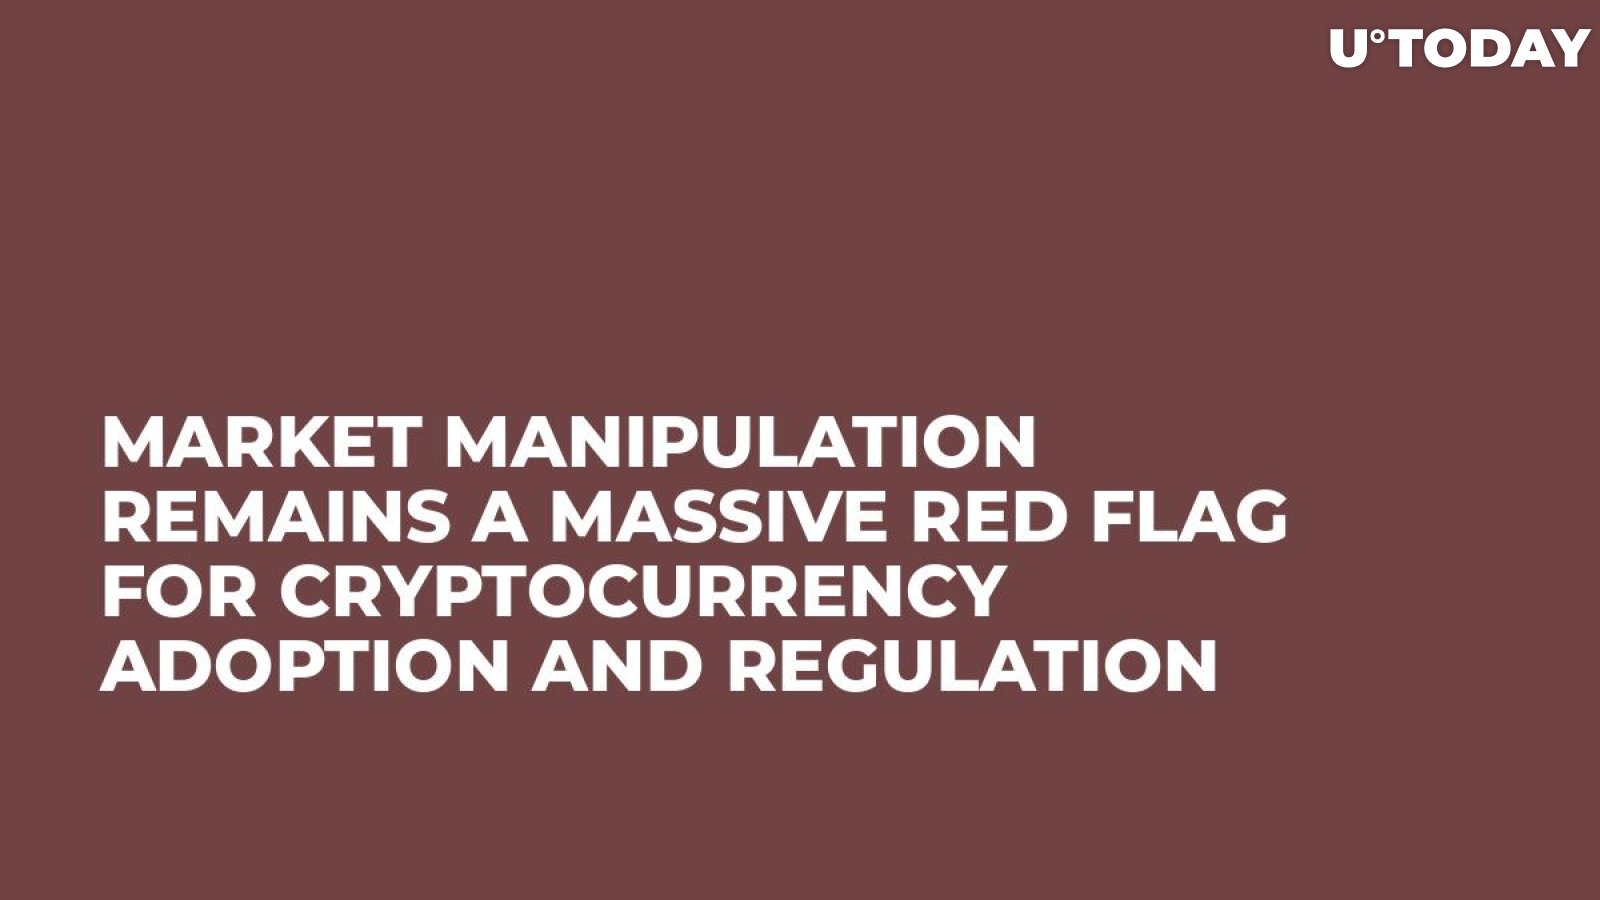 Market Manipulation Remains a Massive Red Flag For Cryptocurrency Adoption and Regulation